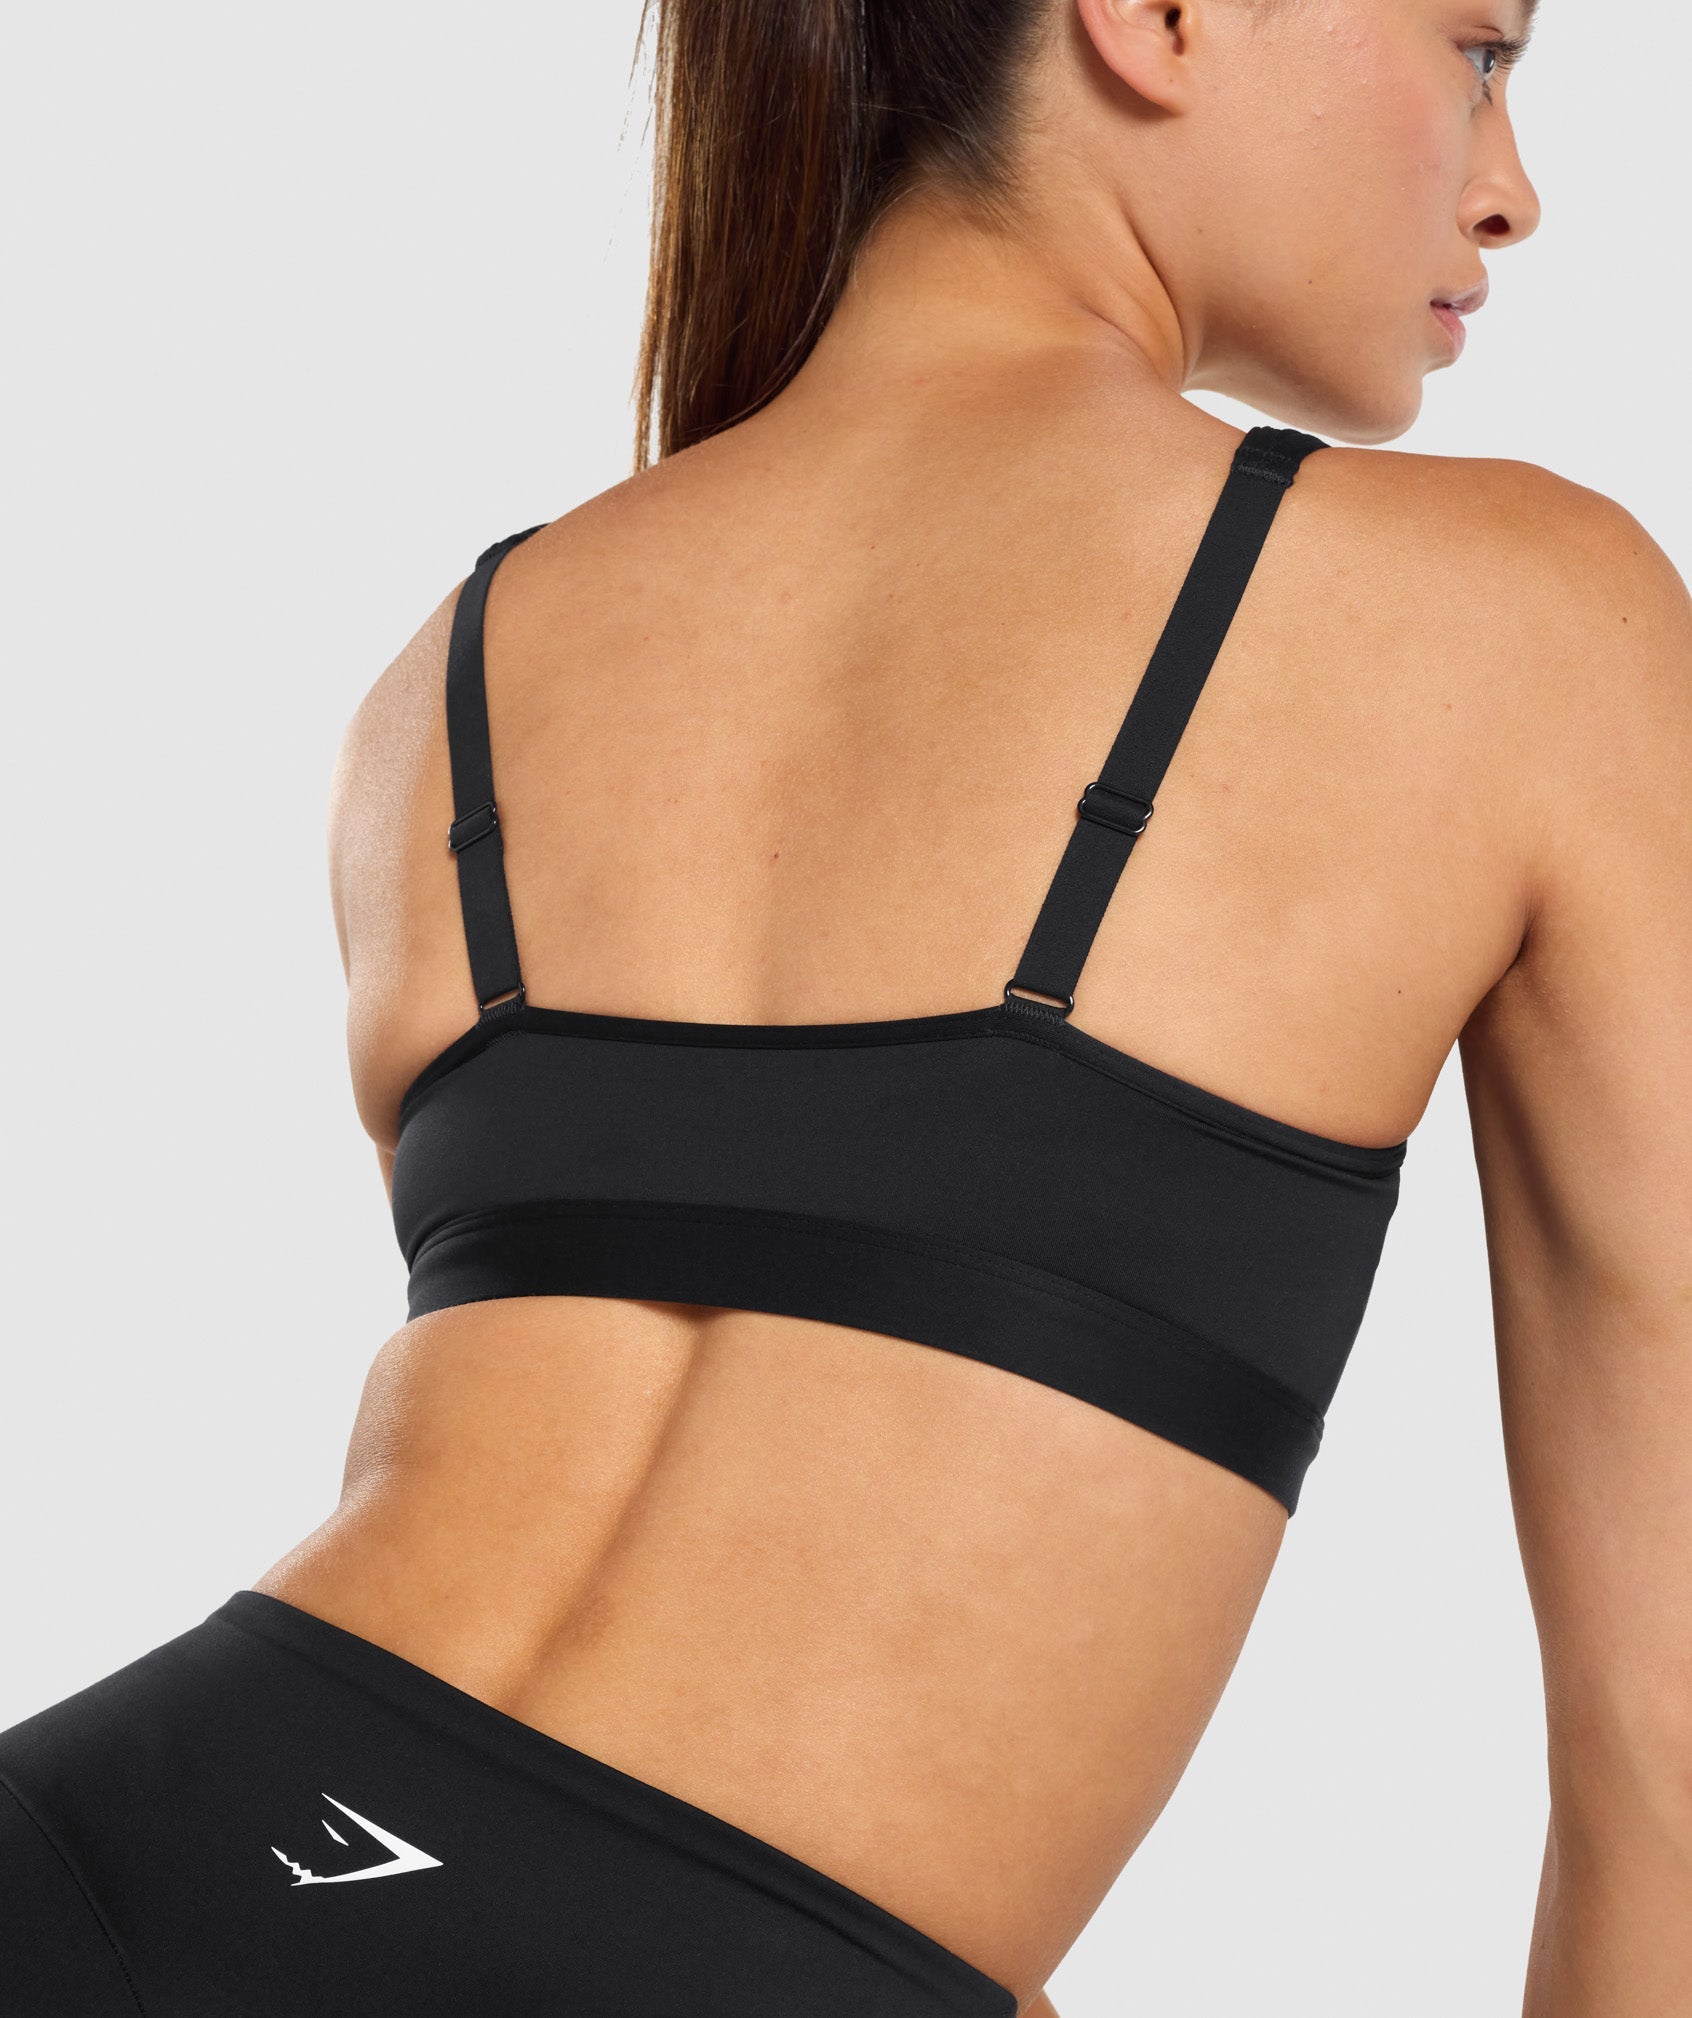 GYMSHARK - NEW Black Cut Out Back Medium Support Sports Bra/Crop Top-Size  Small